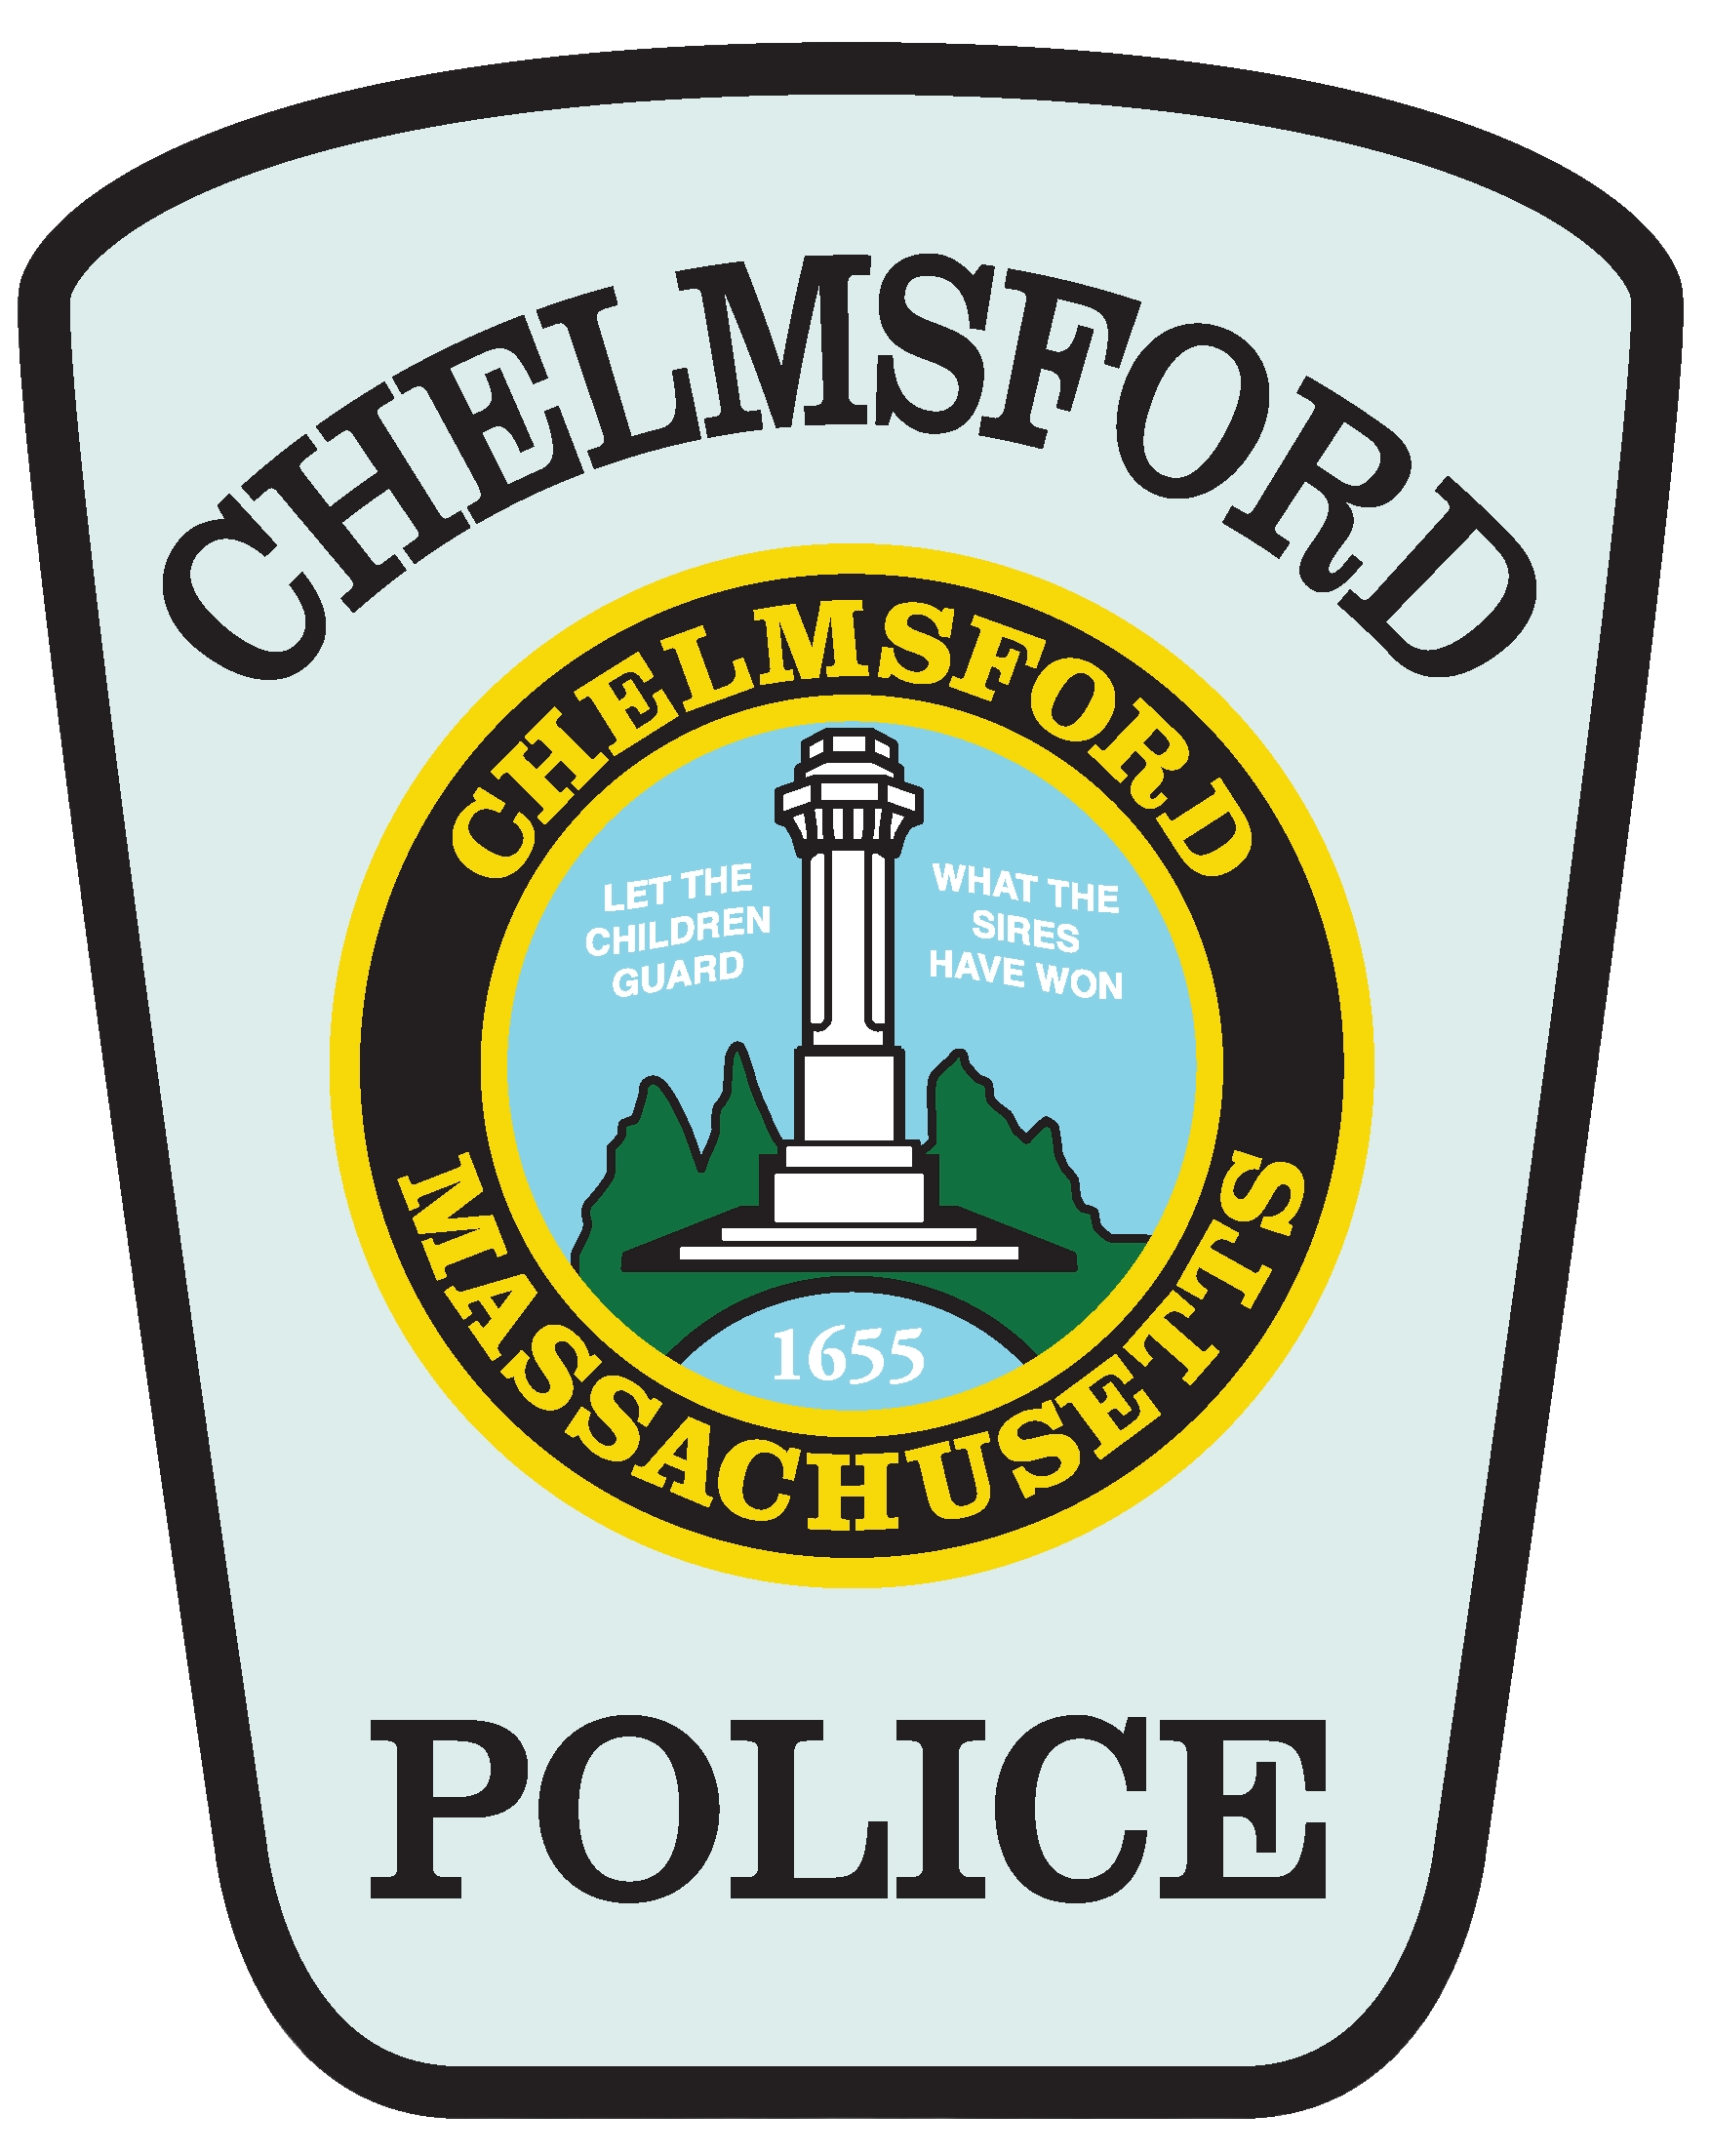 Chelmsford Police Department